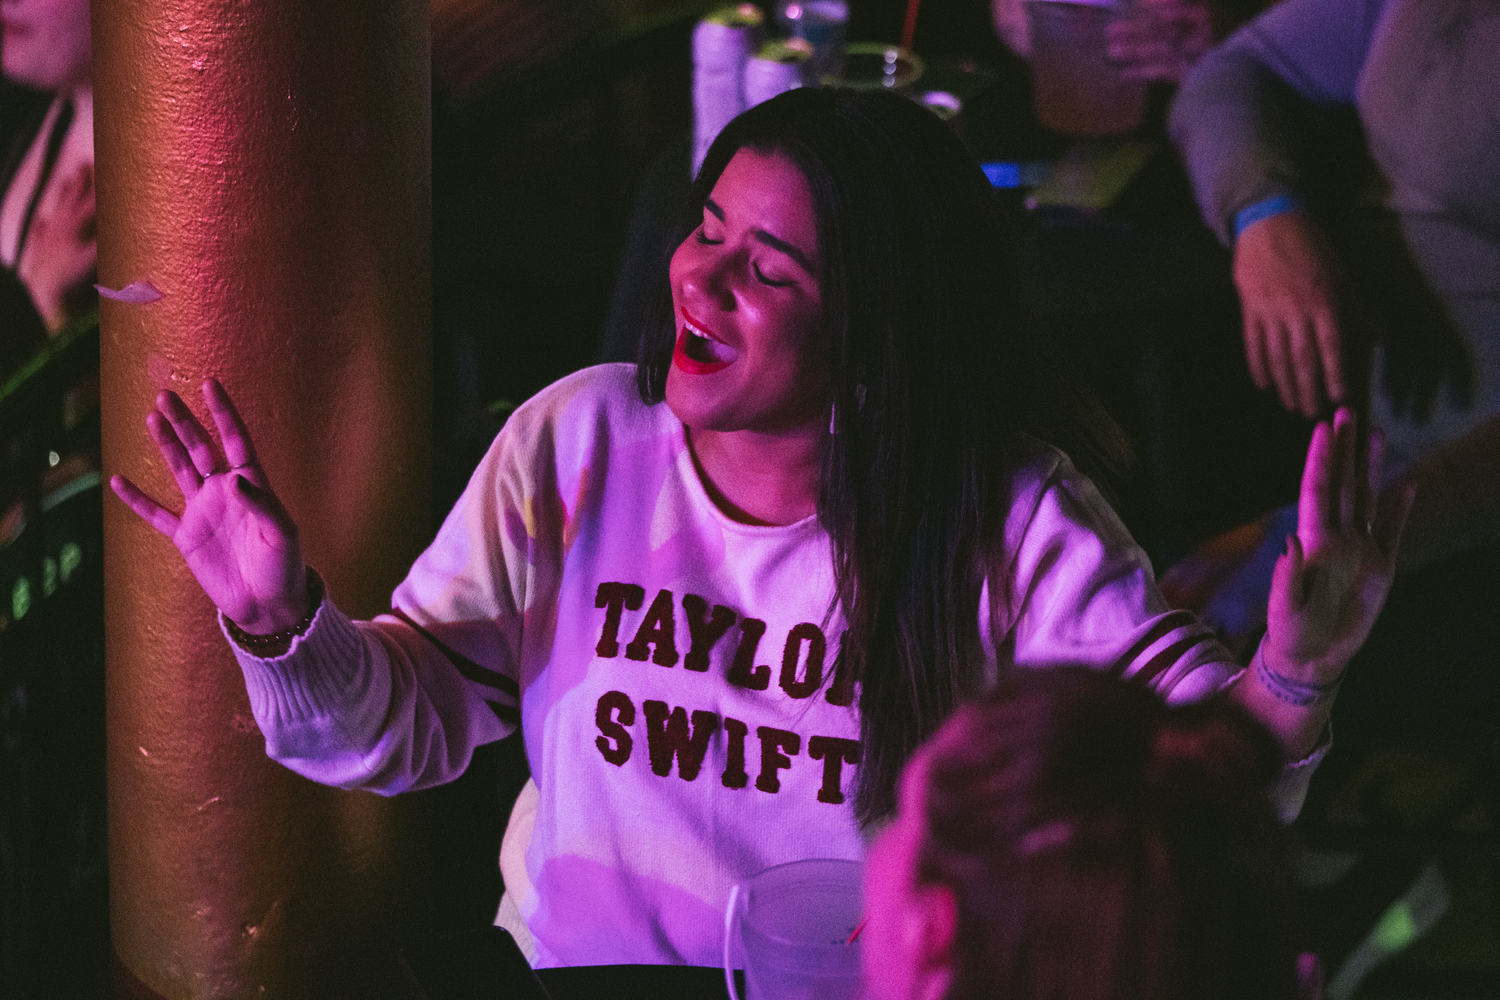 Taylor Swift Style — Rep Room, Indianapolis, IN